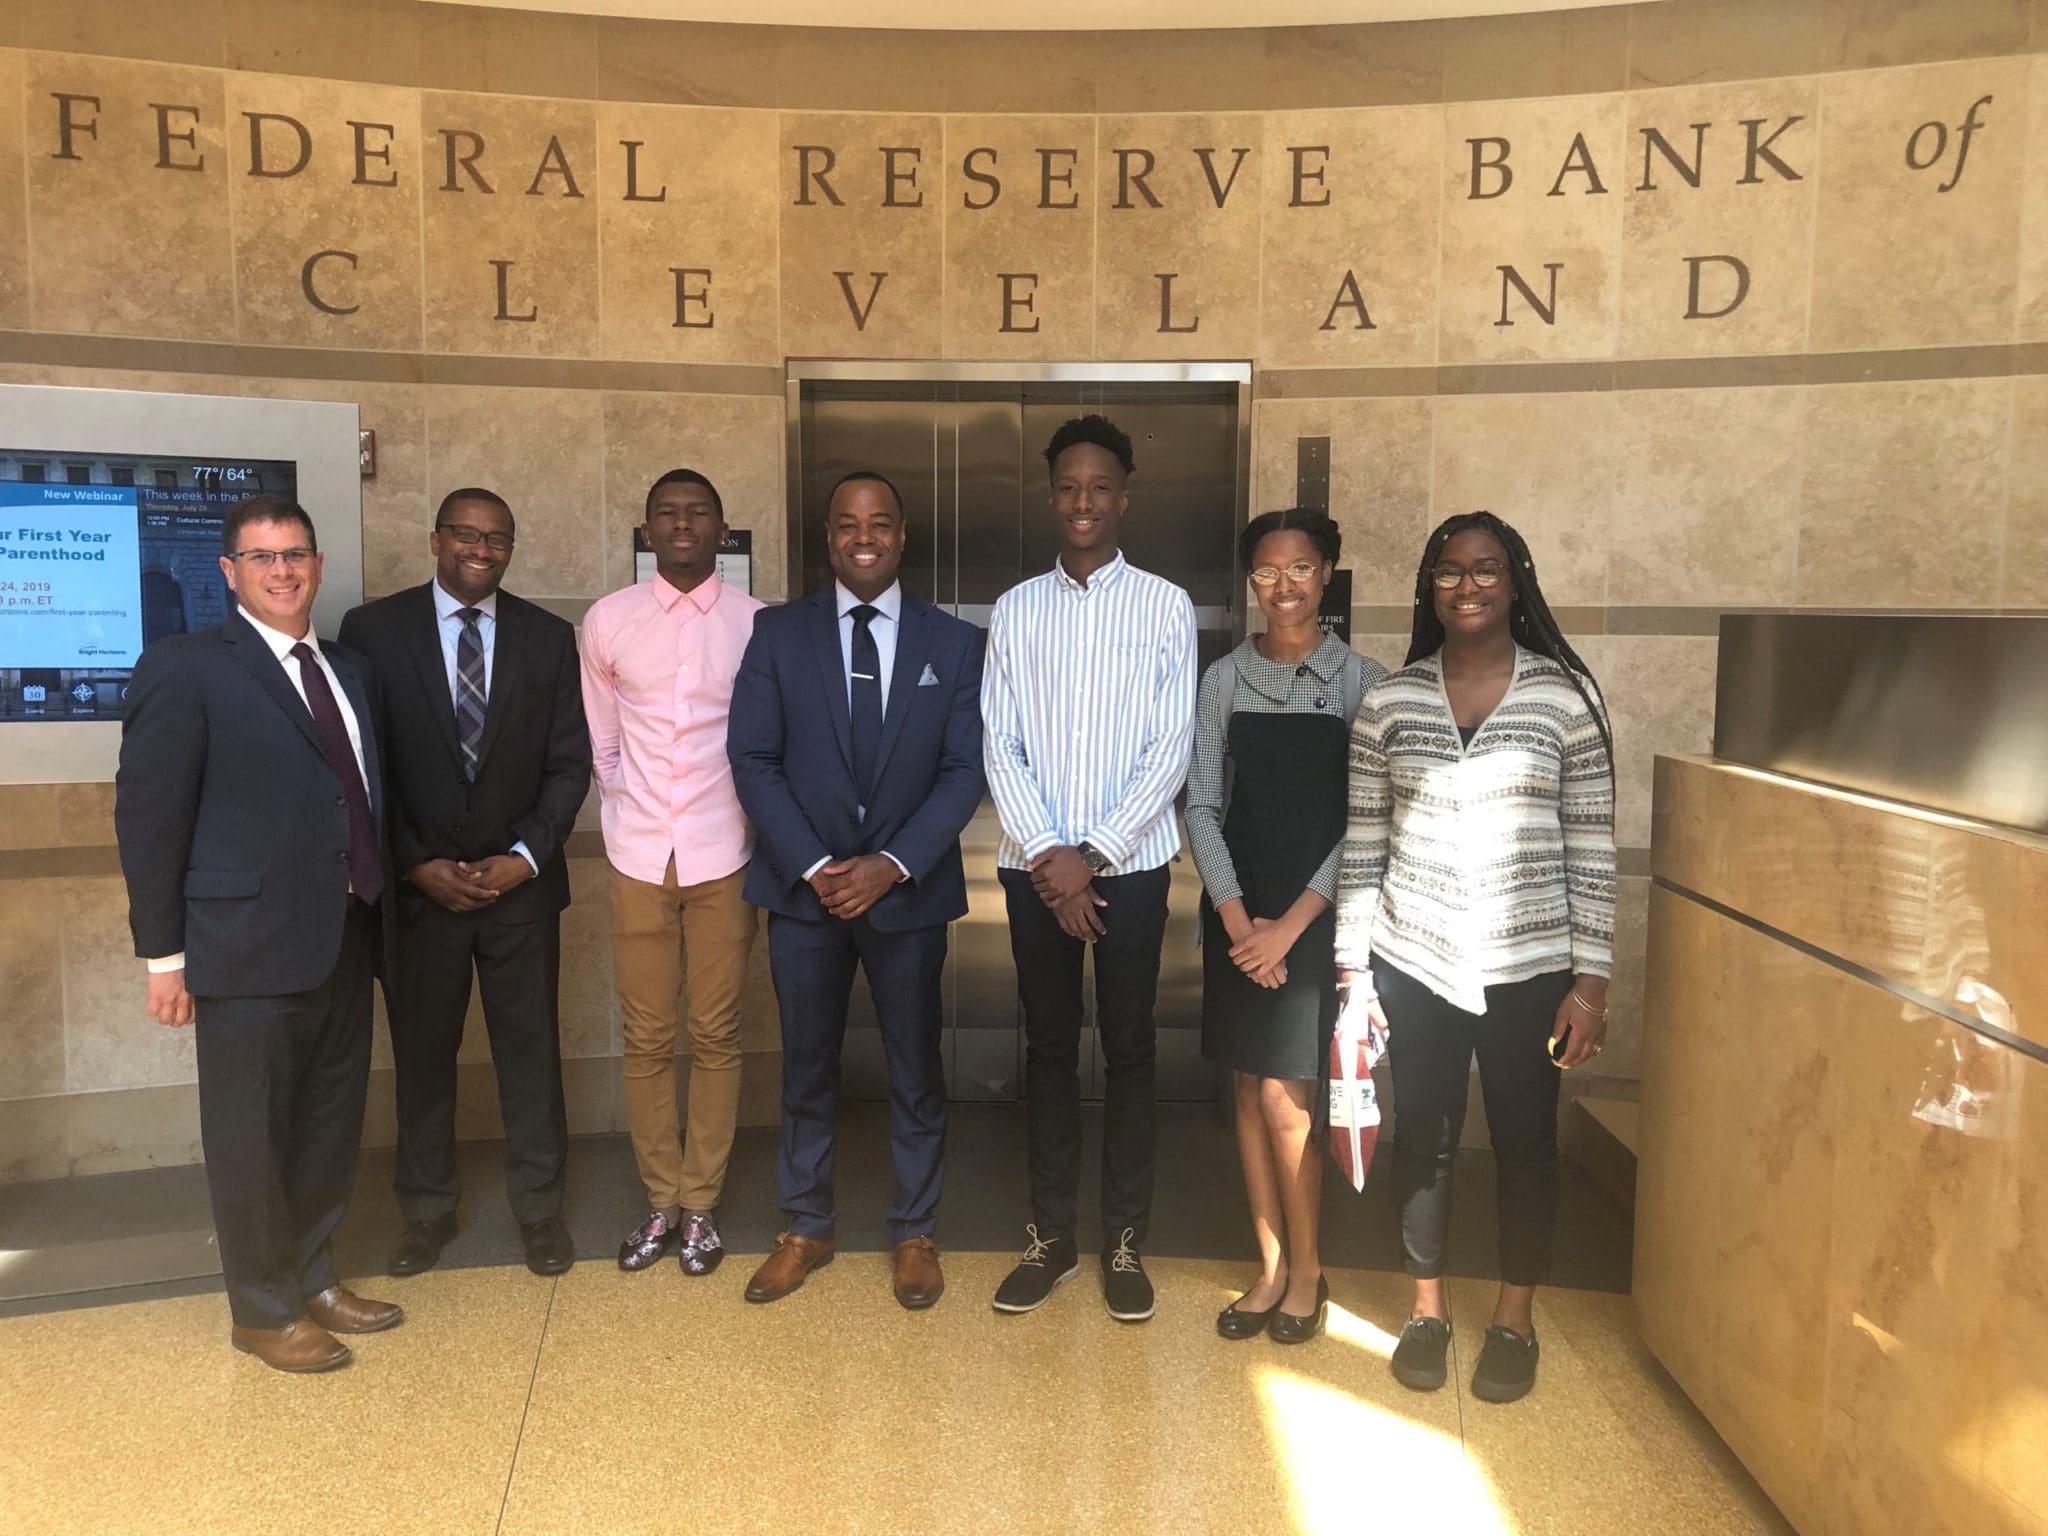 Future Connections - Federal Reserve - Tour 21 - Group Picture